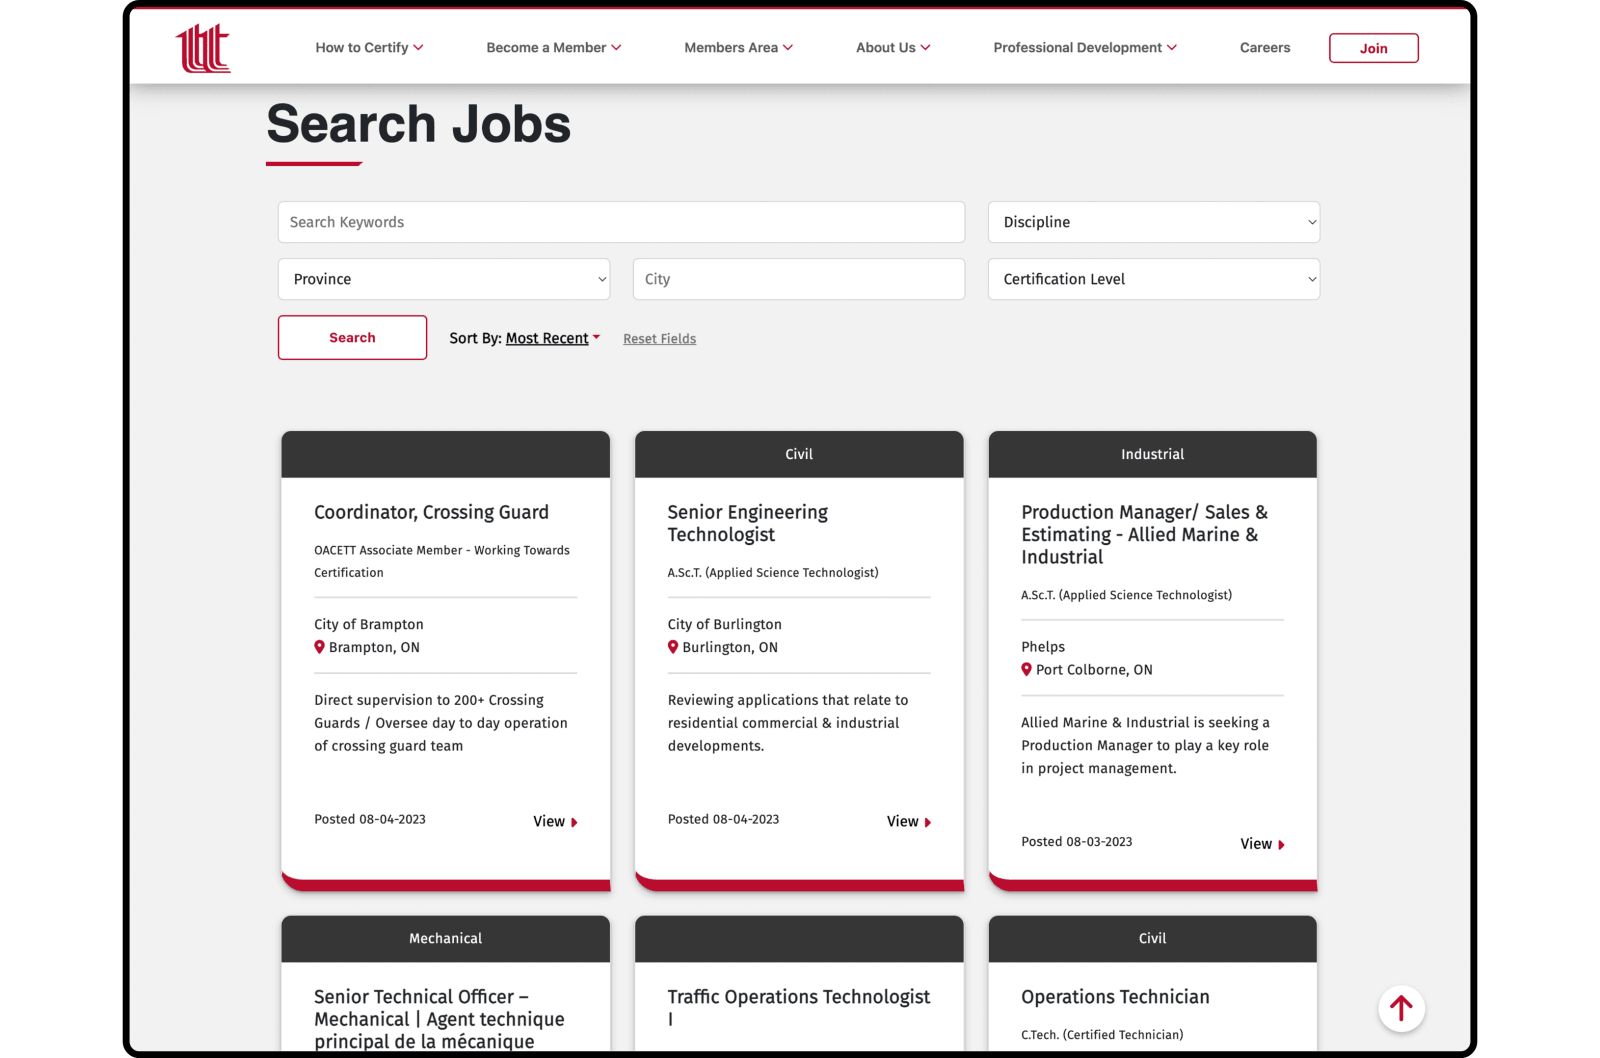 Search and filtering for jobs and careers